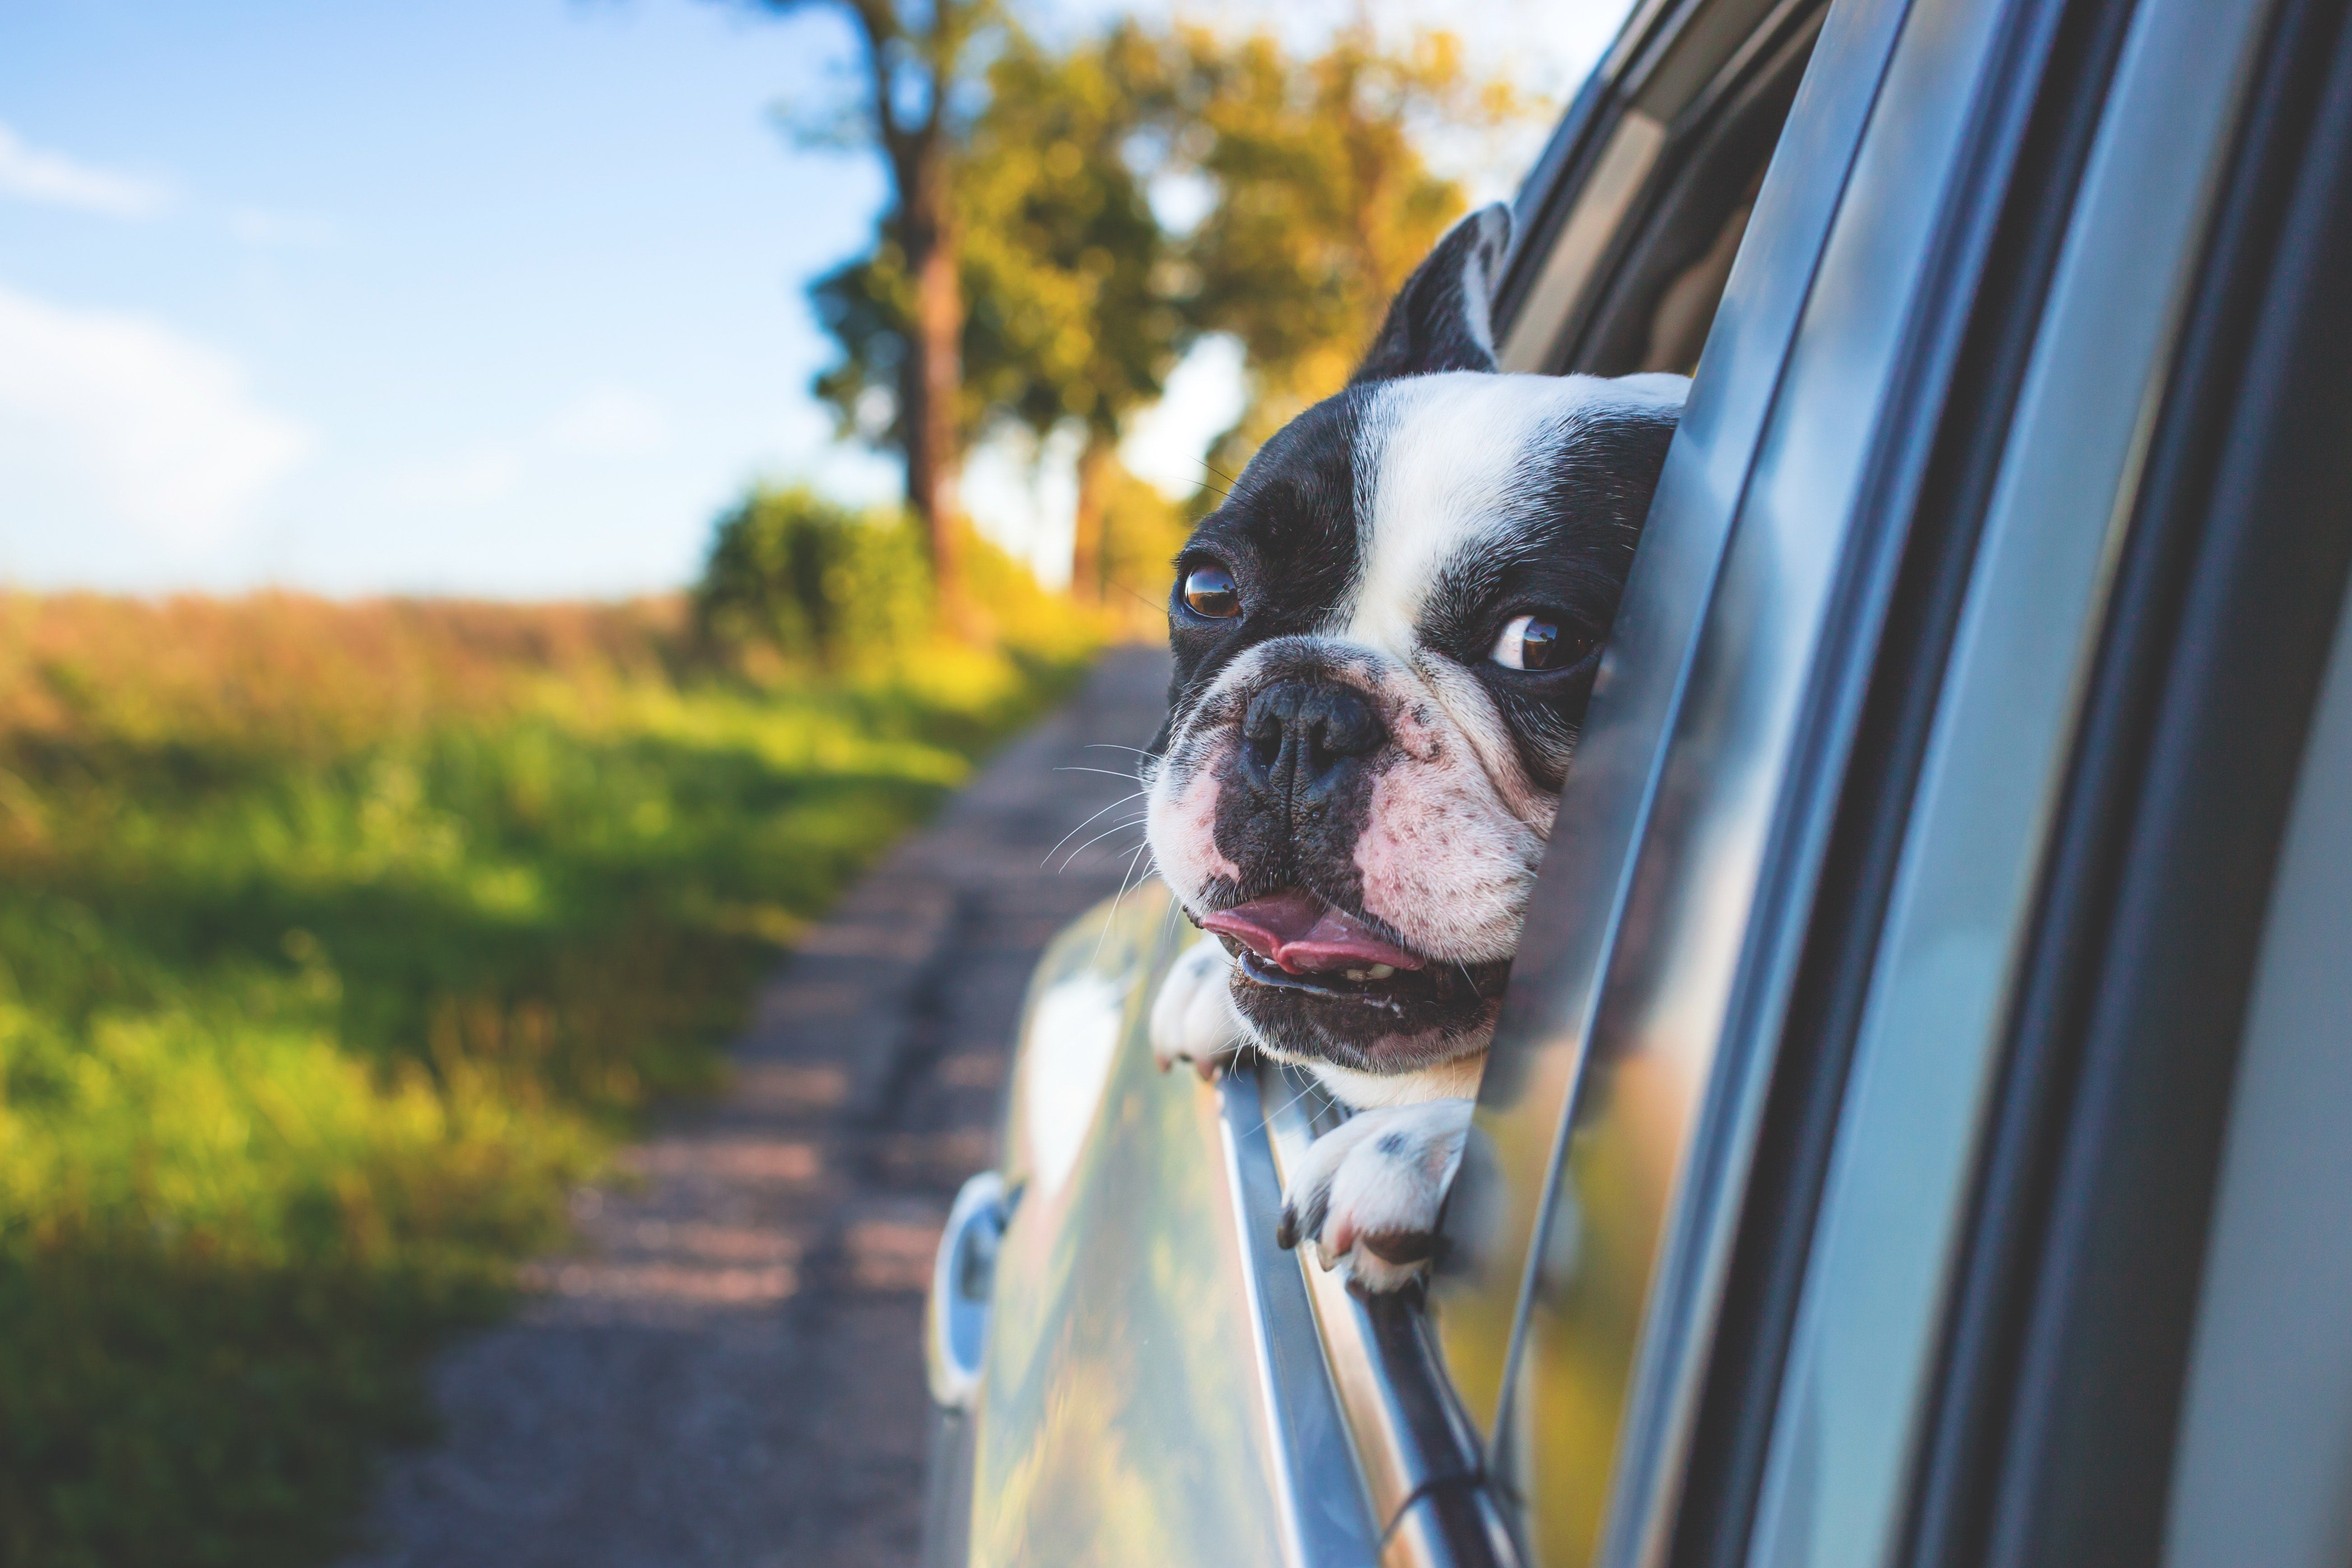 Pro Tips to Help Your Dog With Car/Motion Sickness